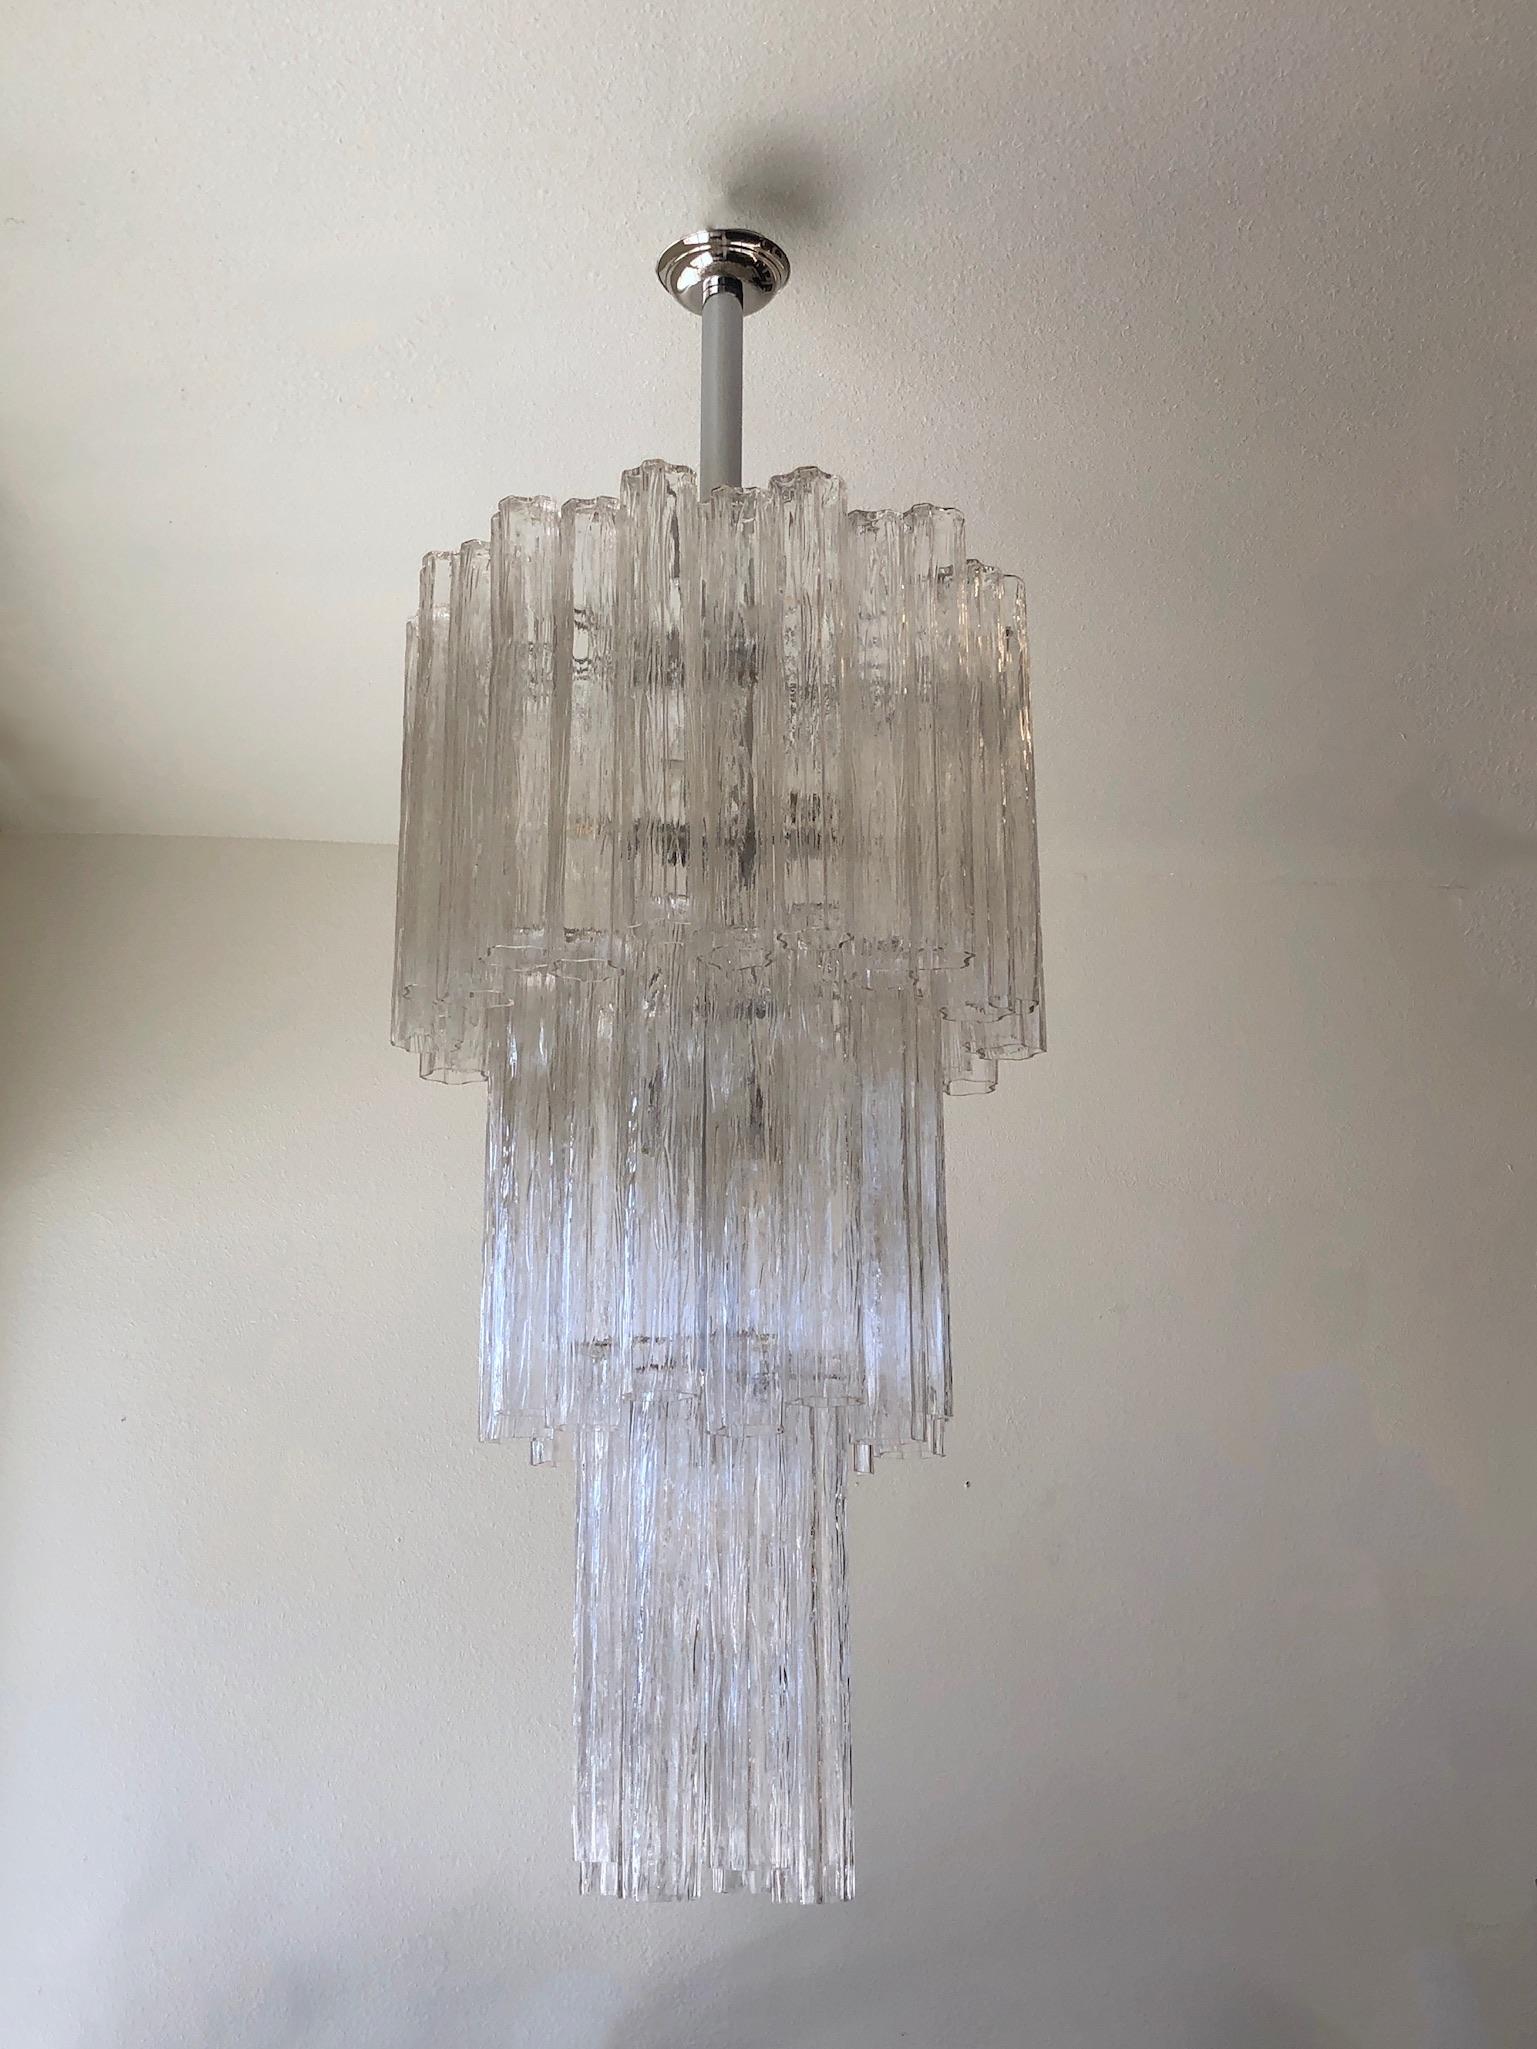 Large 1970s Italian clear Murano glass and polish chrome ’Tronchi’ chandelier by Venini. 
The skeleton shows minor wear consistent with age.
It takes 13 regular Edison lightbulb.
Measurements: 25” diameter and 65” high to ceiling cap.
Note: We